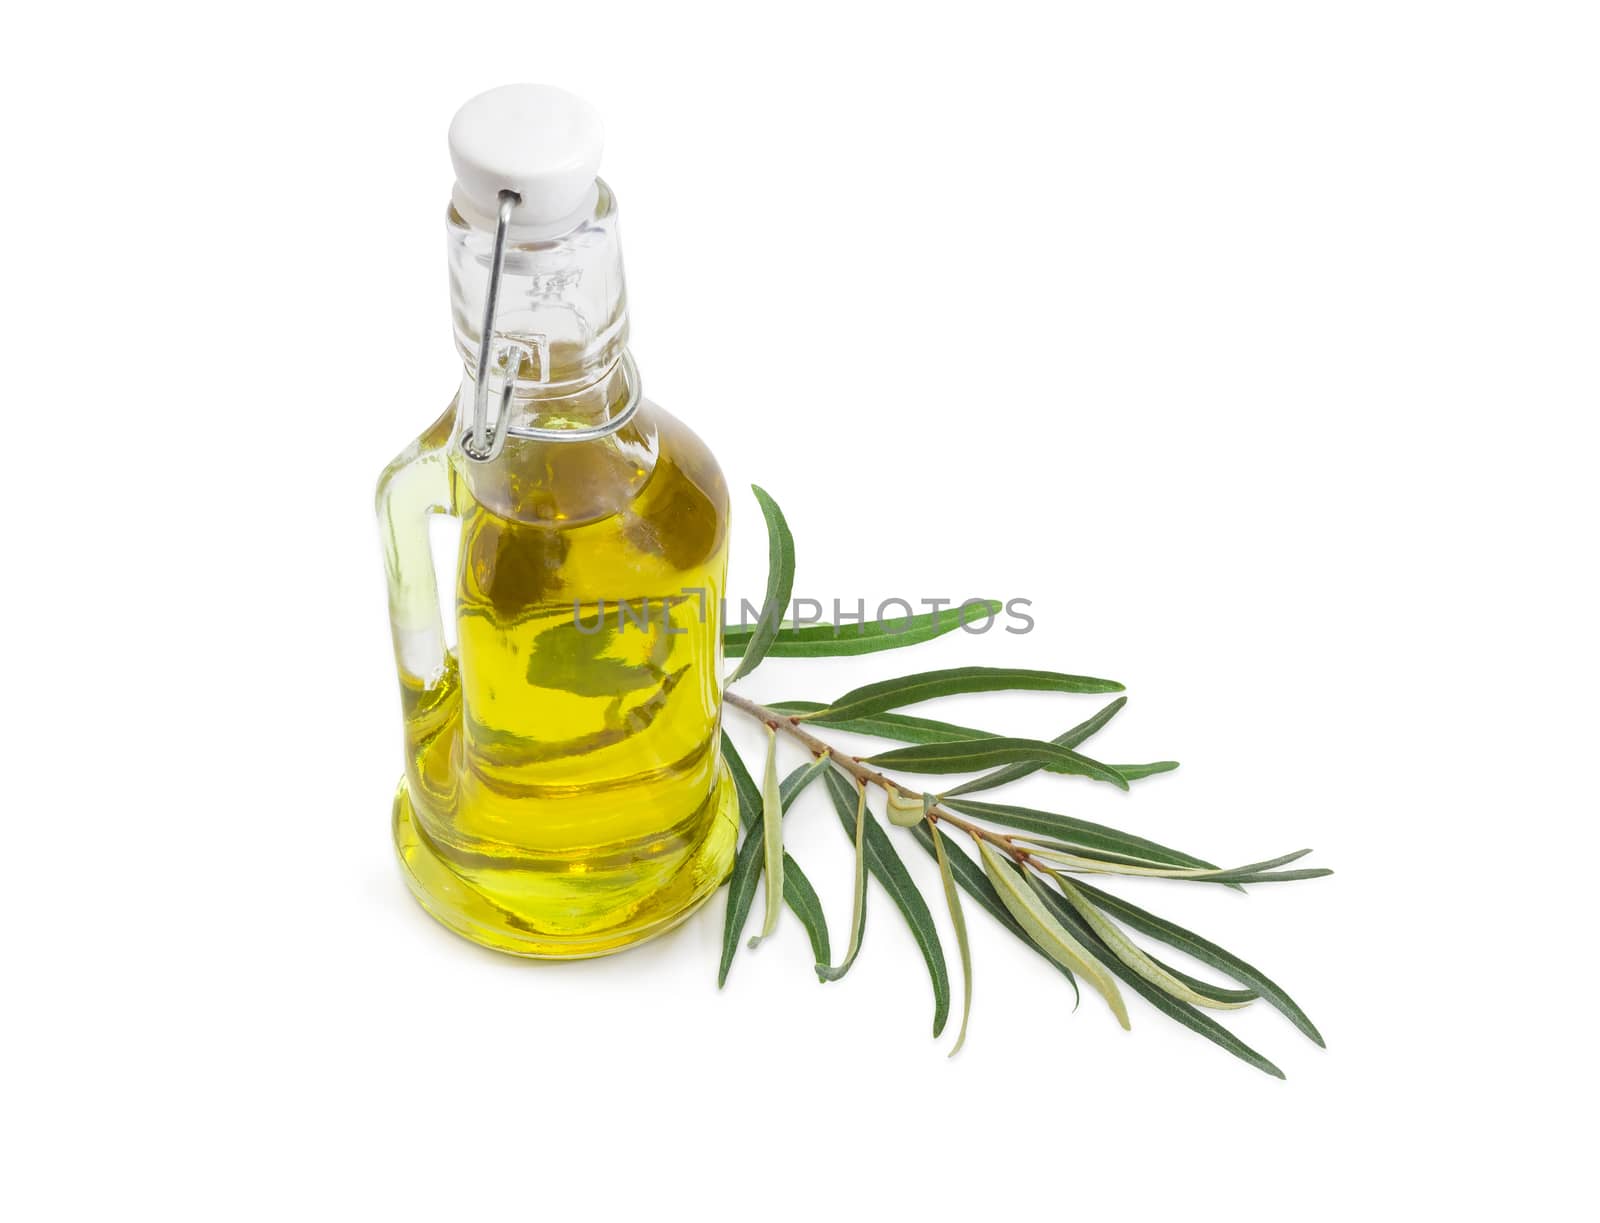 Small glass bottle of olive oil and olive branch beside on a white background
